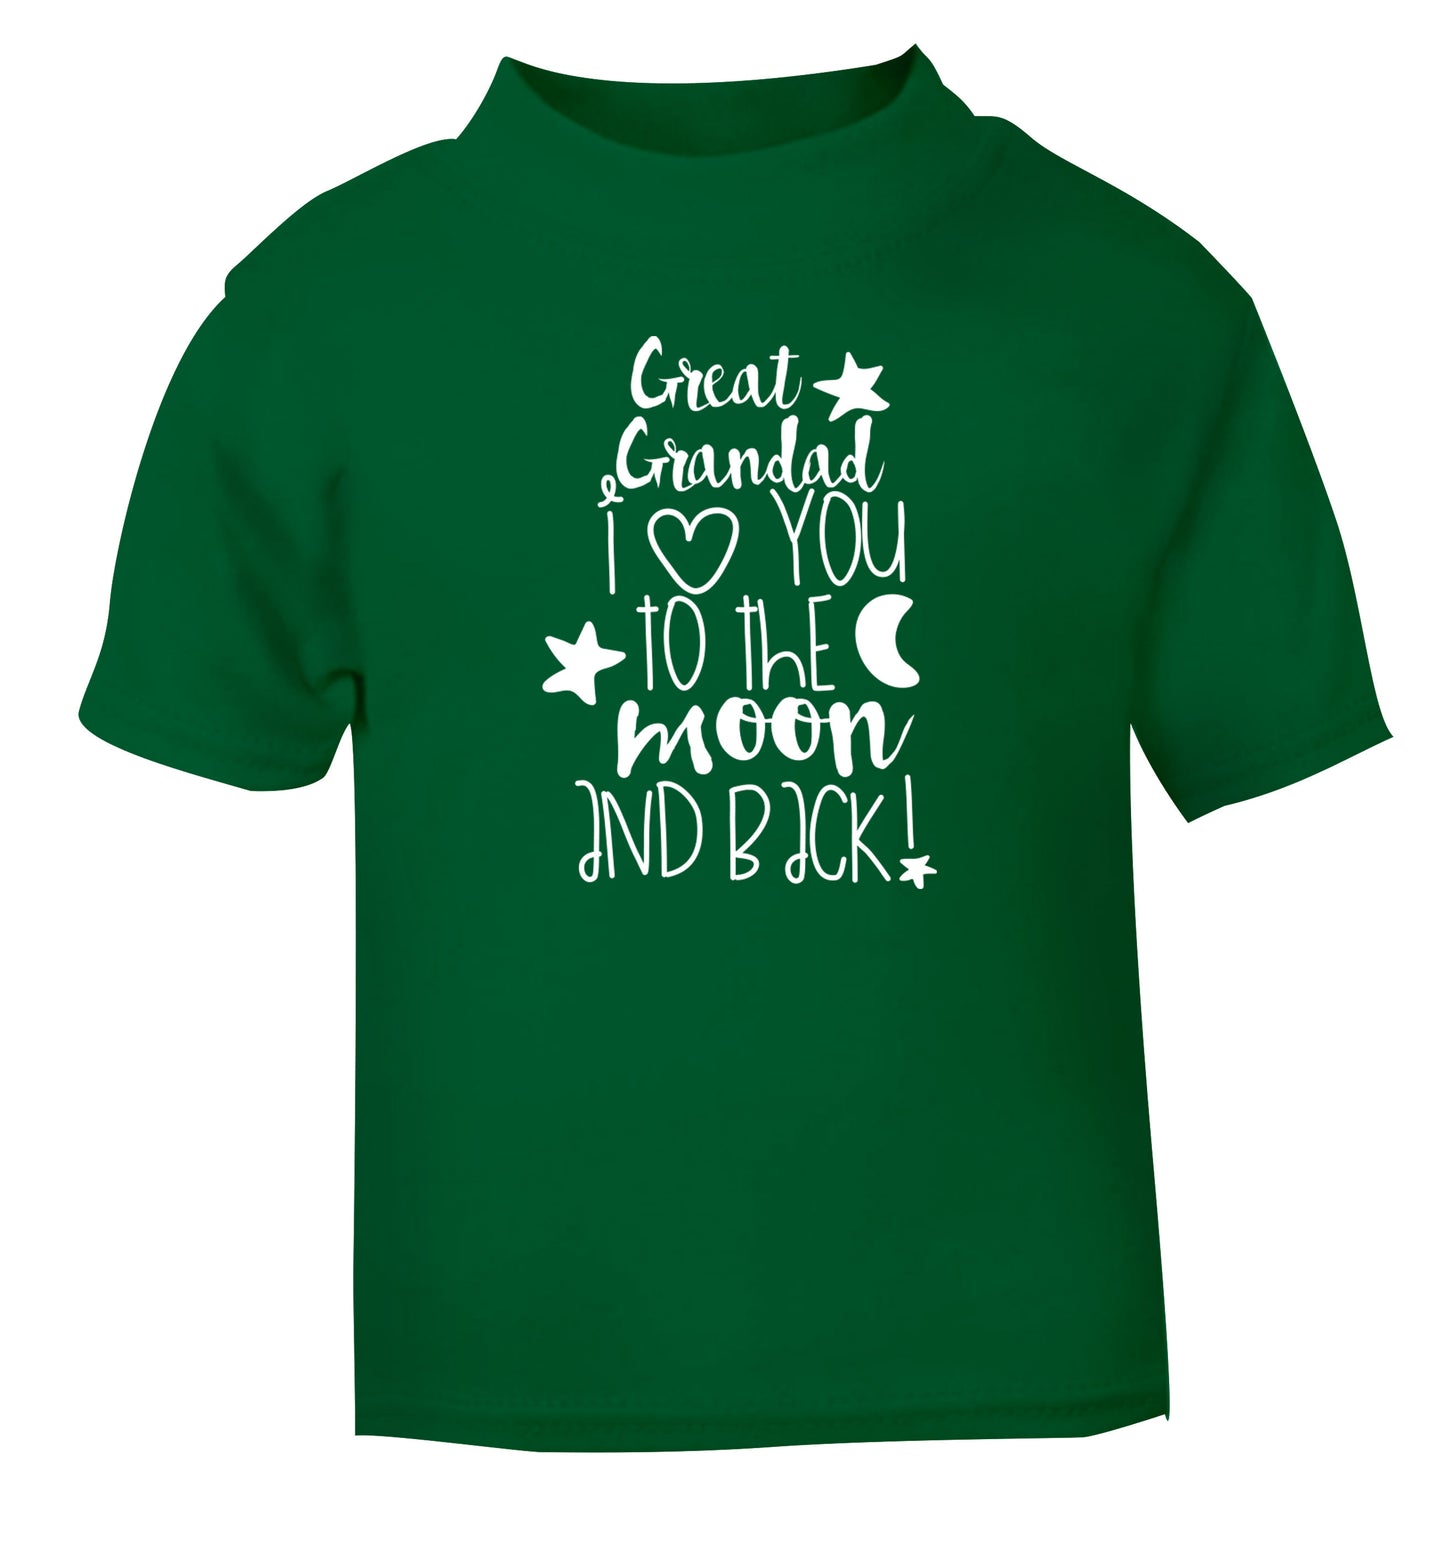 Great Grandad I love you to the moon and back green Baby Toddler Tshirt 2 Years